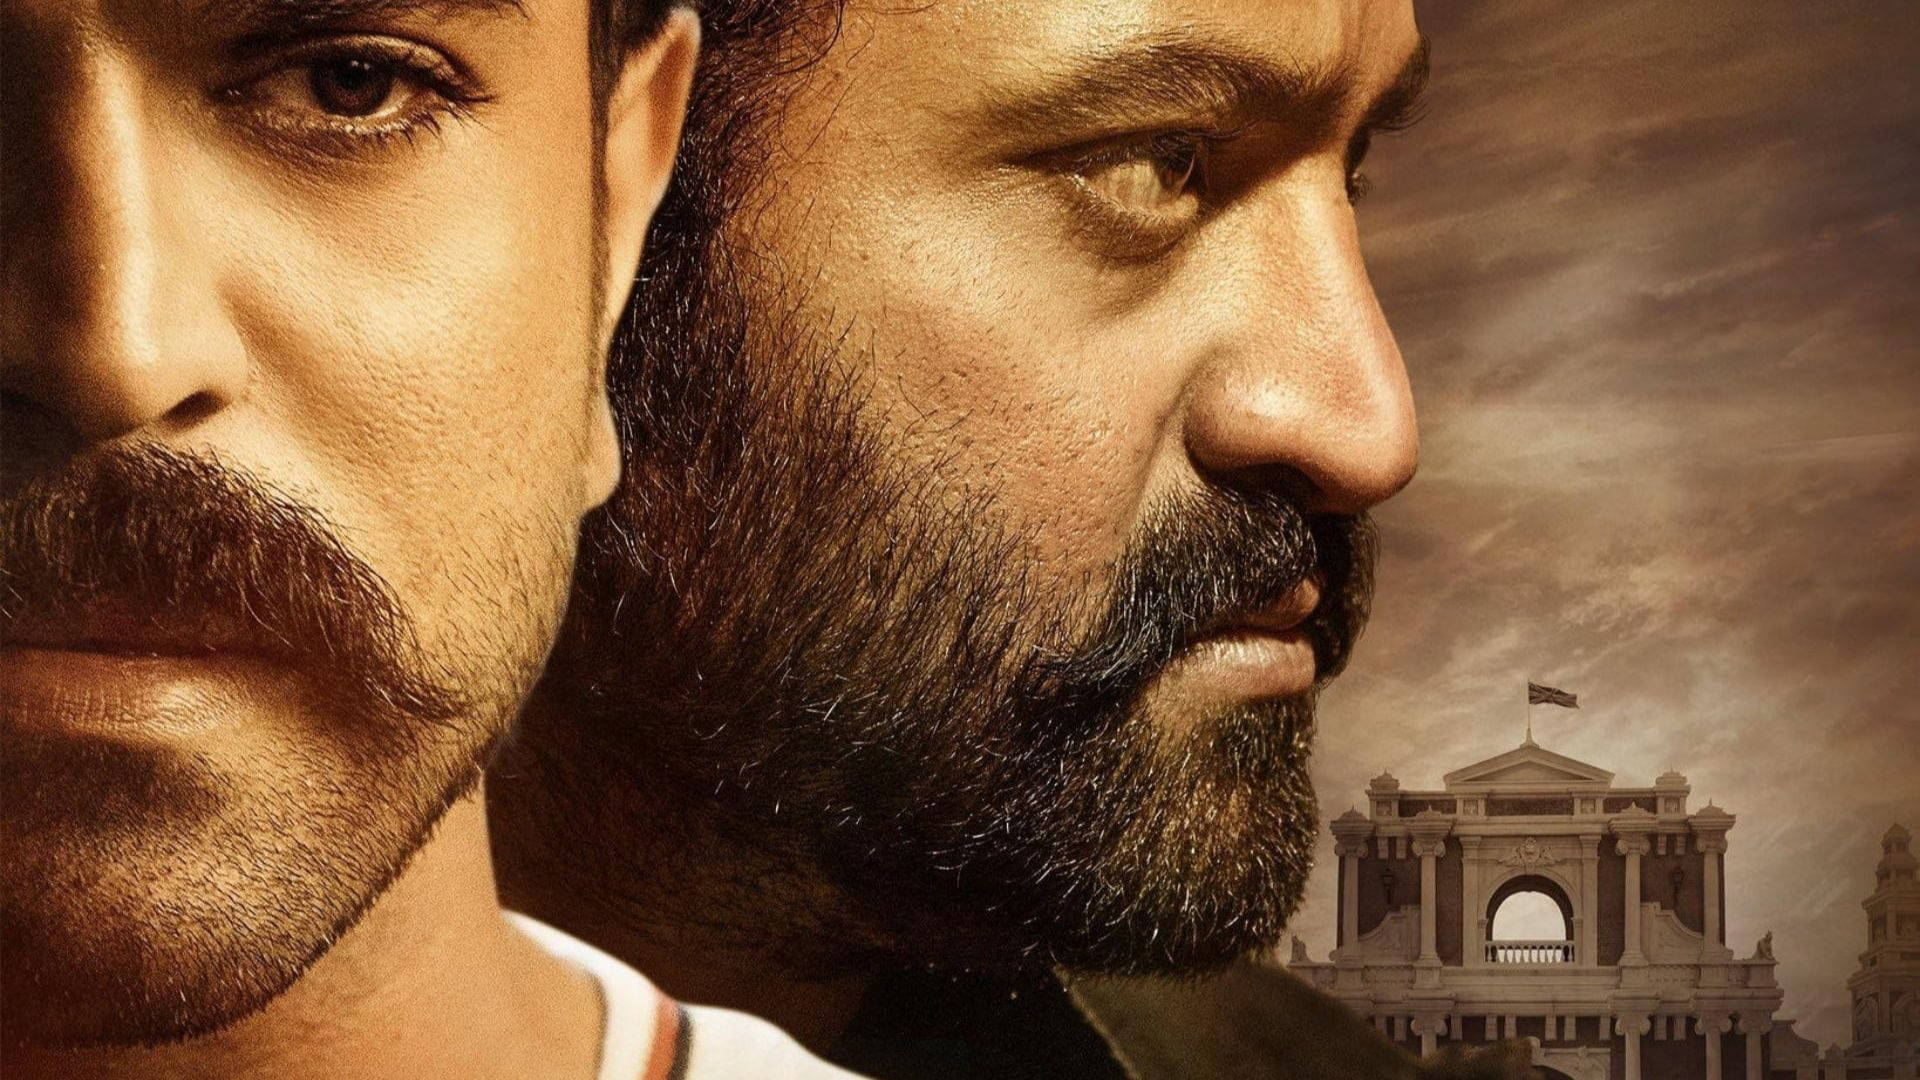 Fascinating Close-up Shot Of Ram Charan And N.t. Rama Side Faces In High-definition. Background